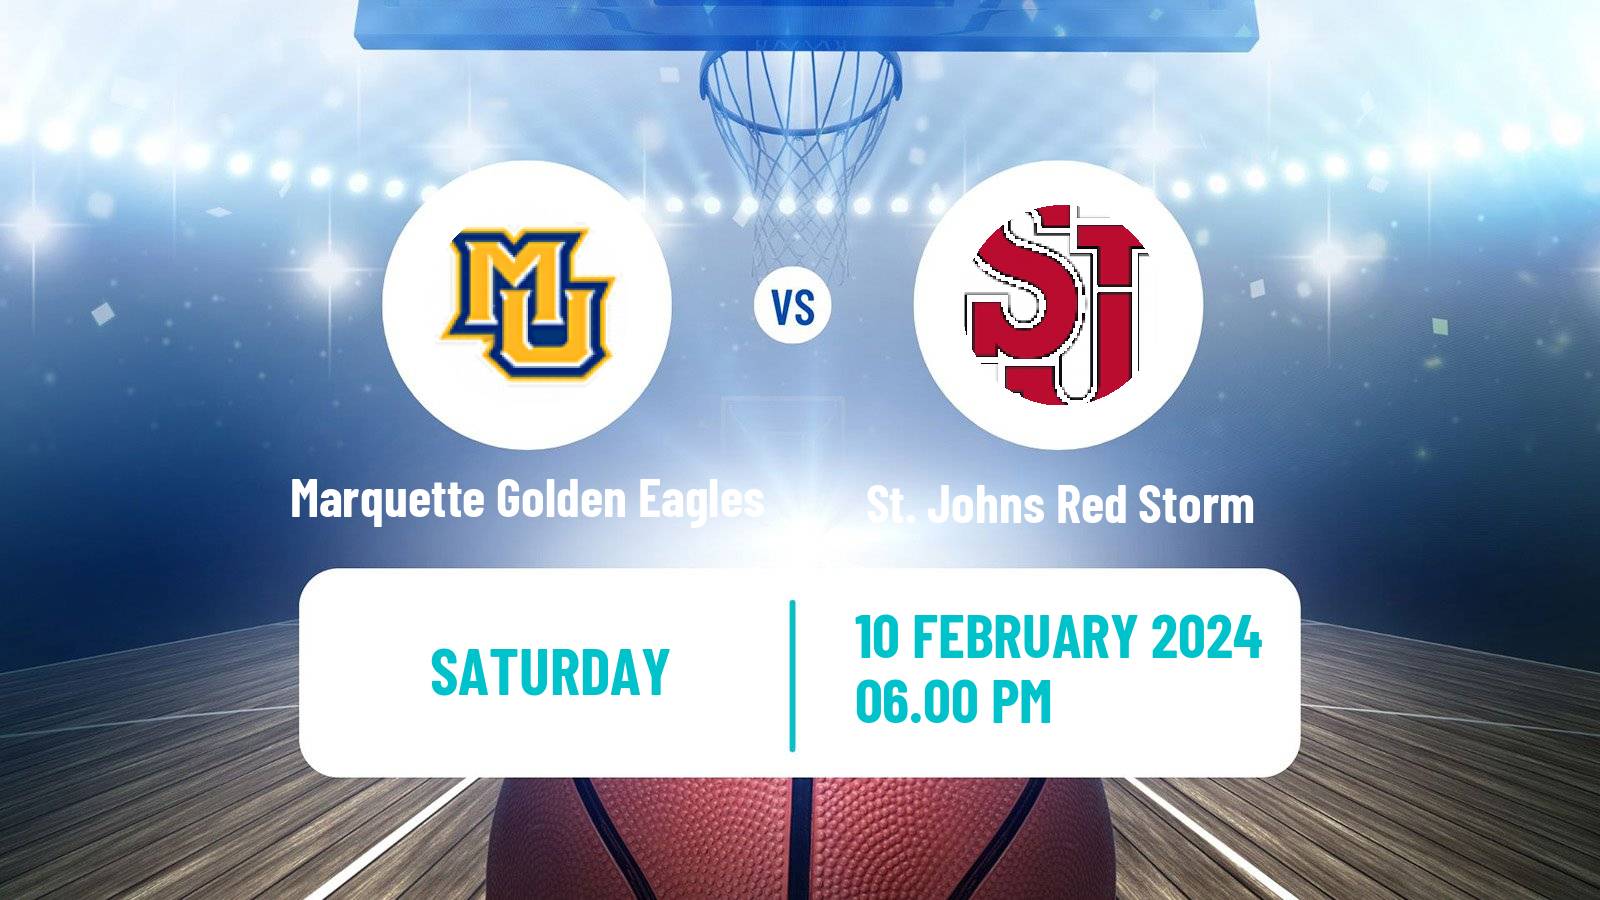 Basketball NCAA College Basketball Marquette Golden Eagles - St. Johns Red Storm